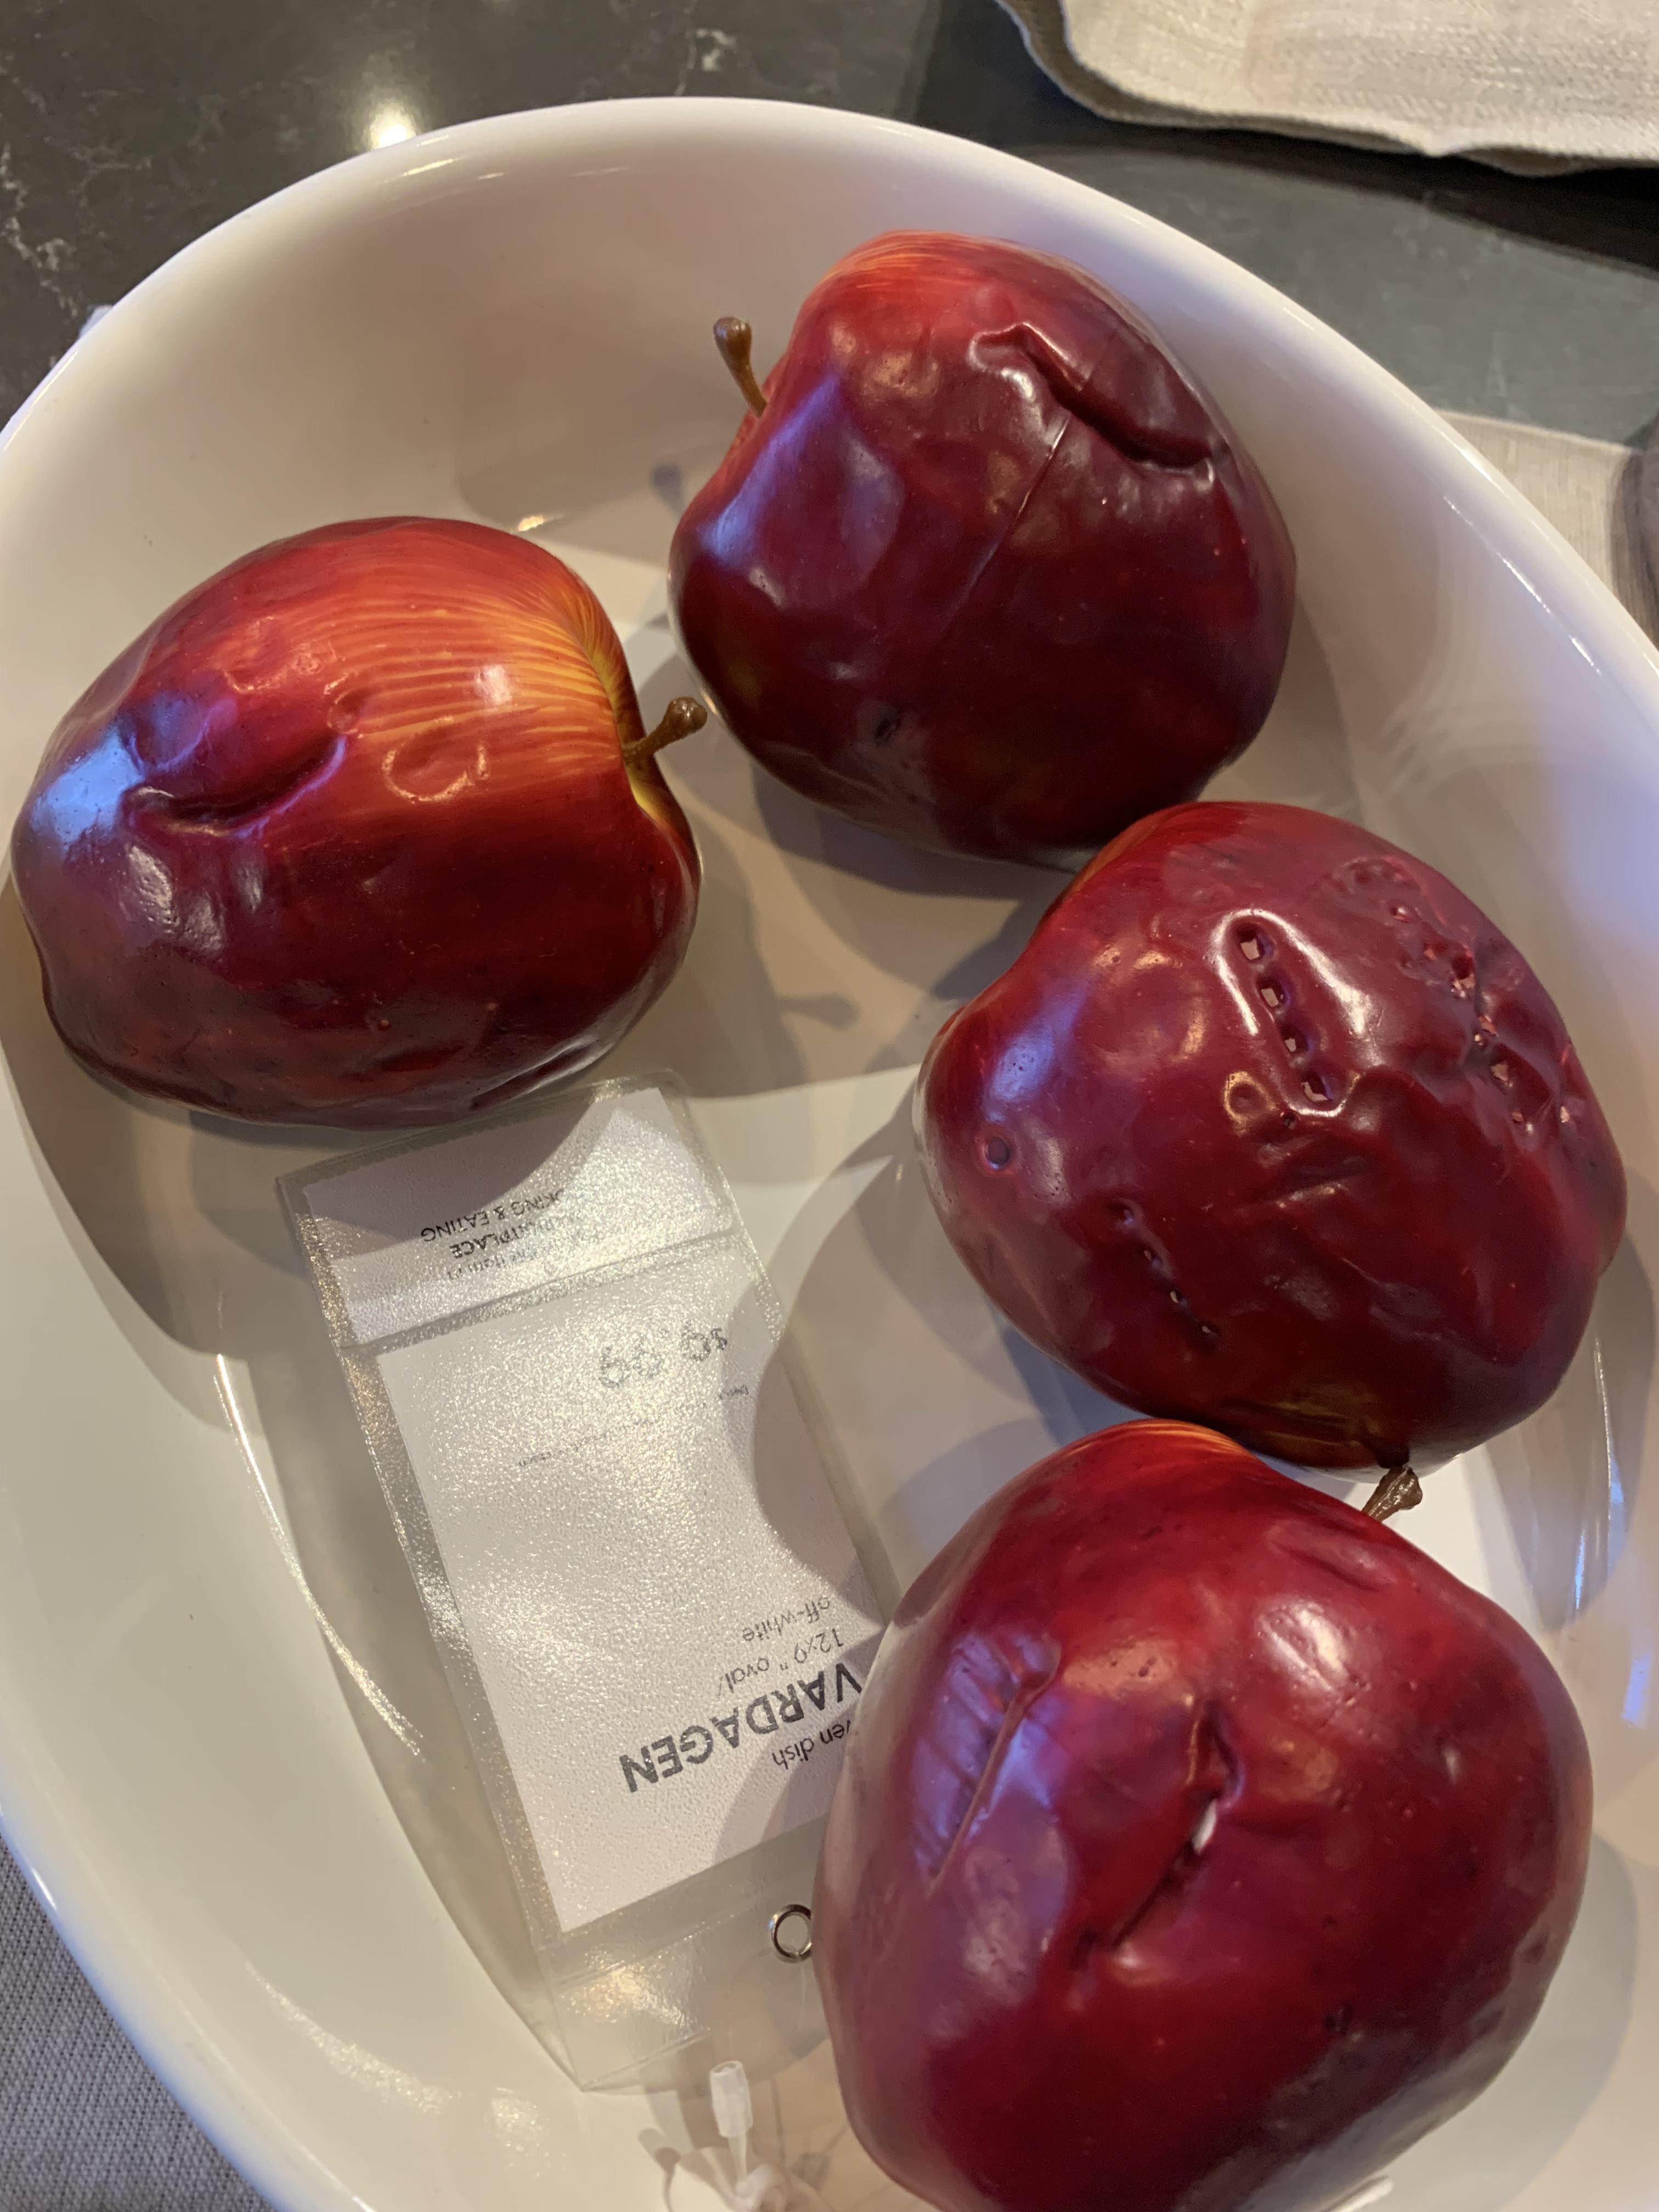 The concerning amount of bite marks on IKEA display apples...